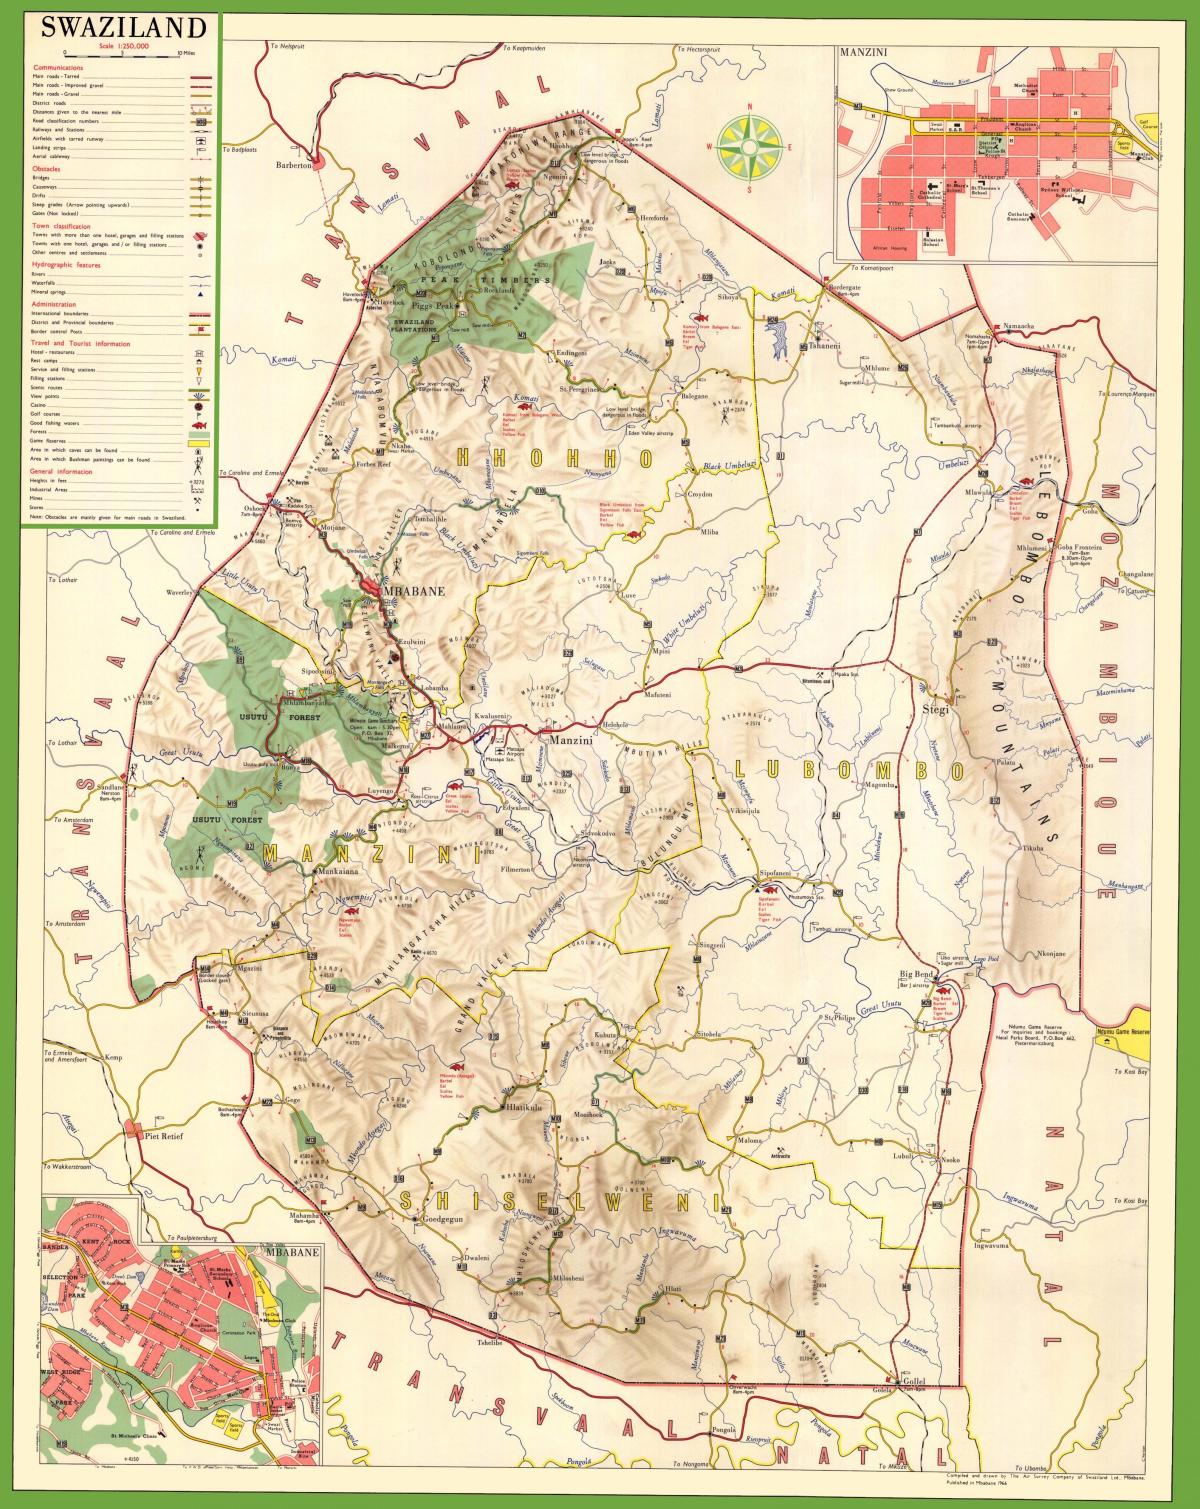 Map of Swaziland detailed